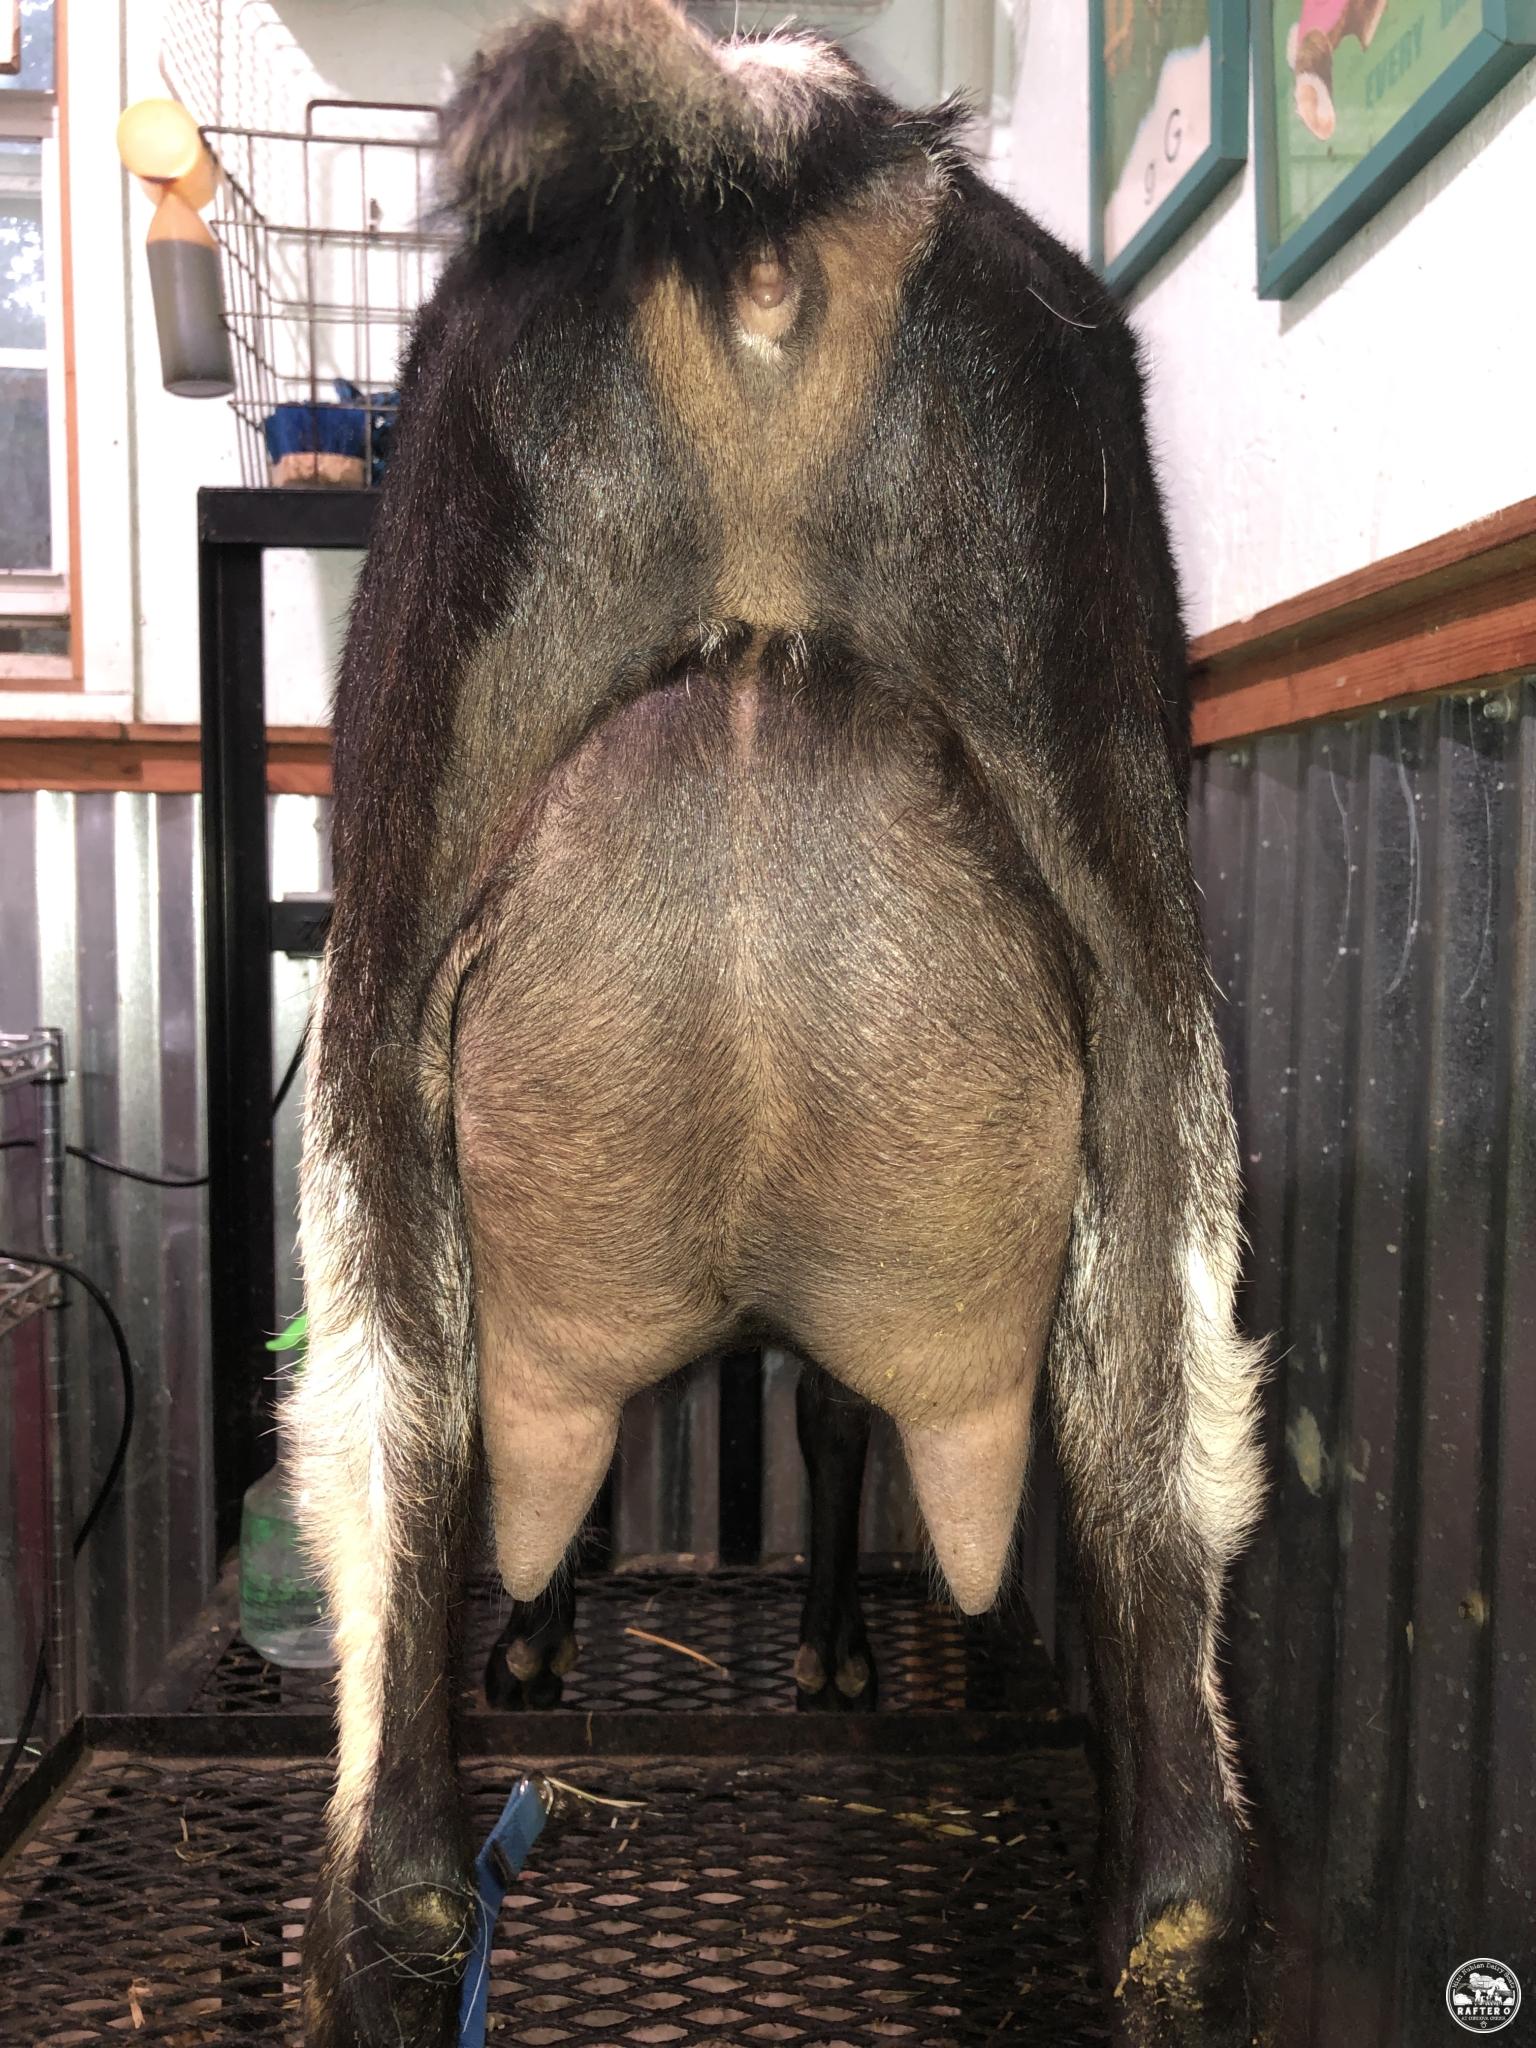 Dam: Nomad Once in a Blue Moon - Rear Udder